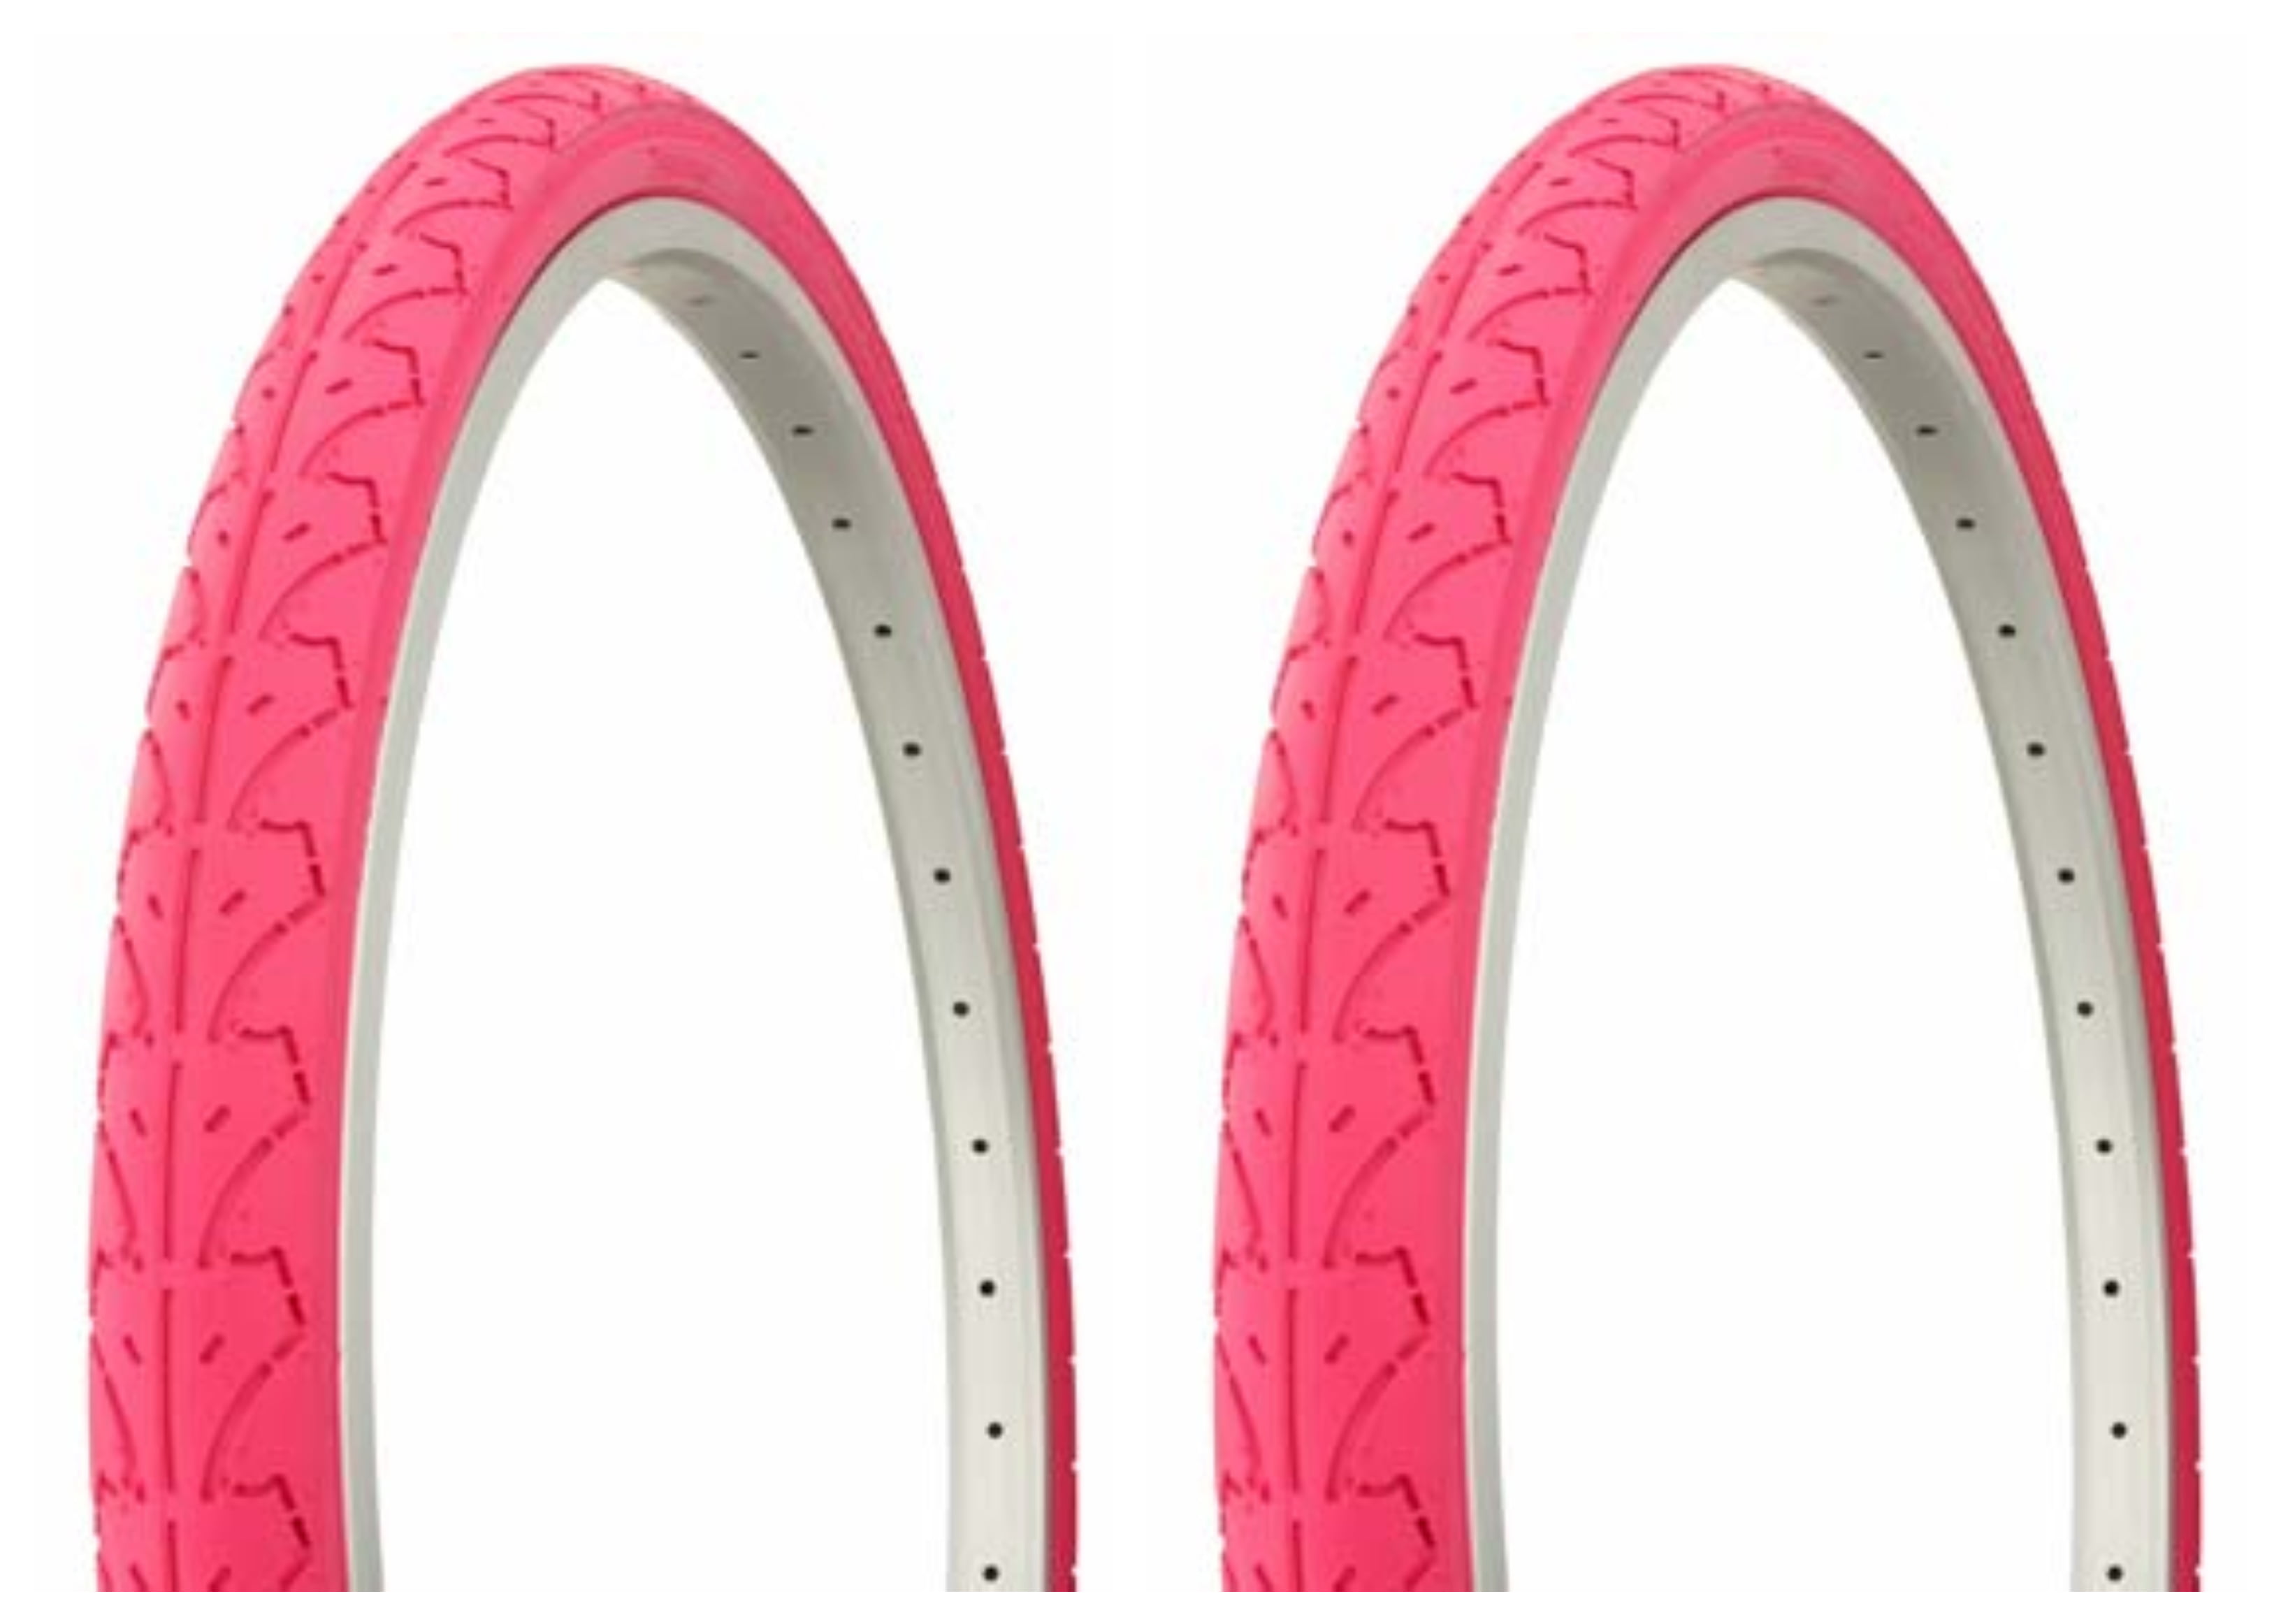 Pair of Duro 26x2.10 Gum Wall Mountain Bicycle Tires with Two 2 Duro inner tubes 